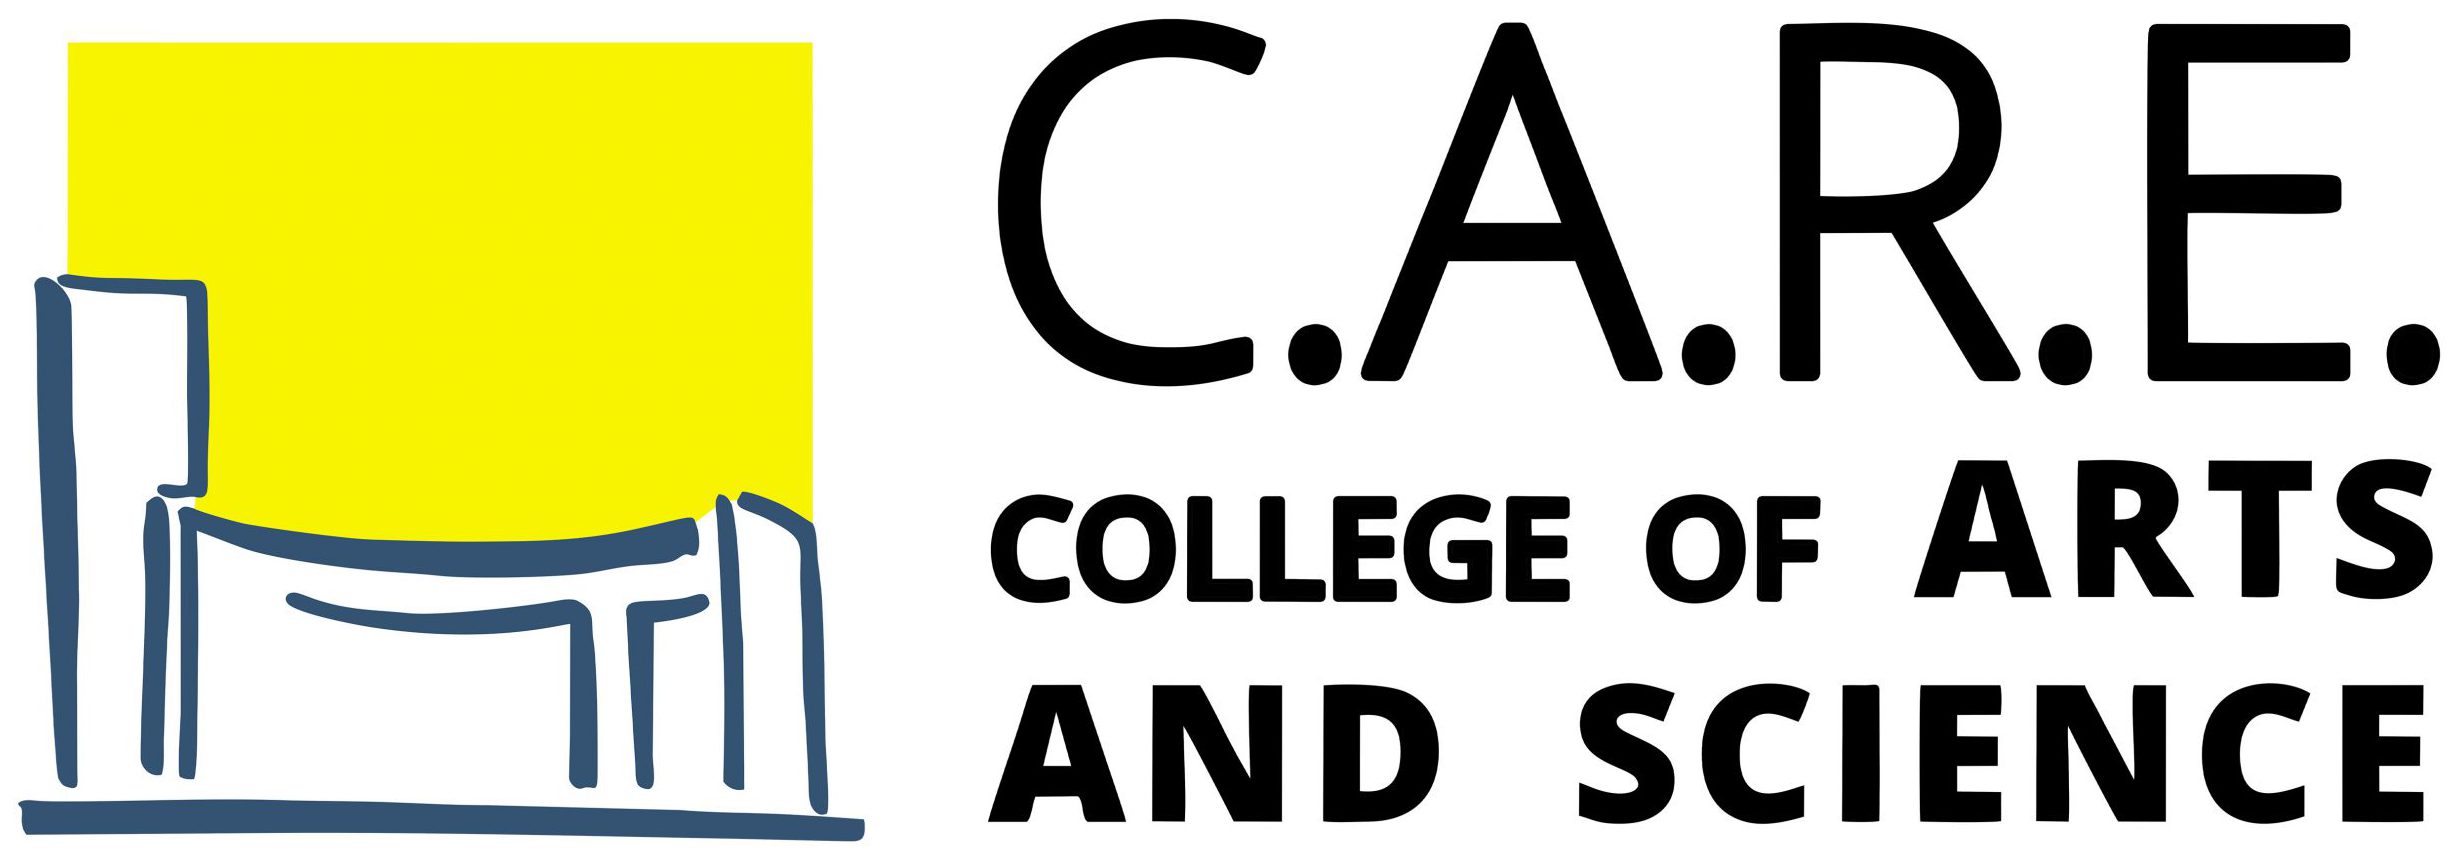 CARE College of Arts and Science